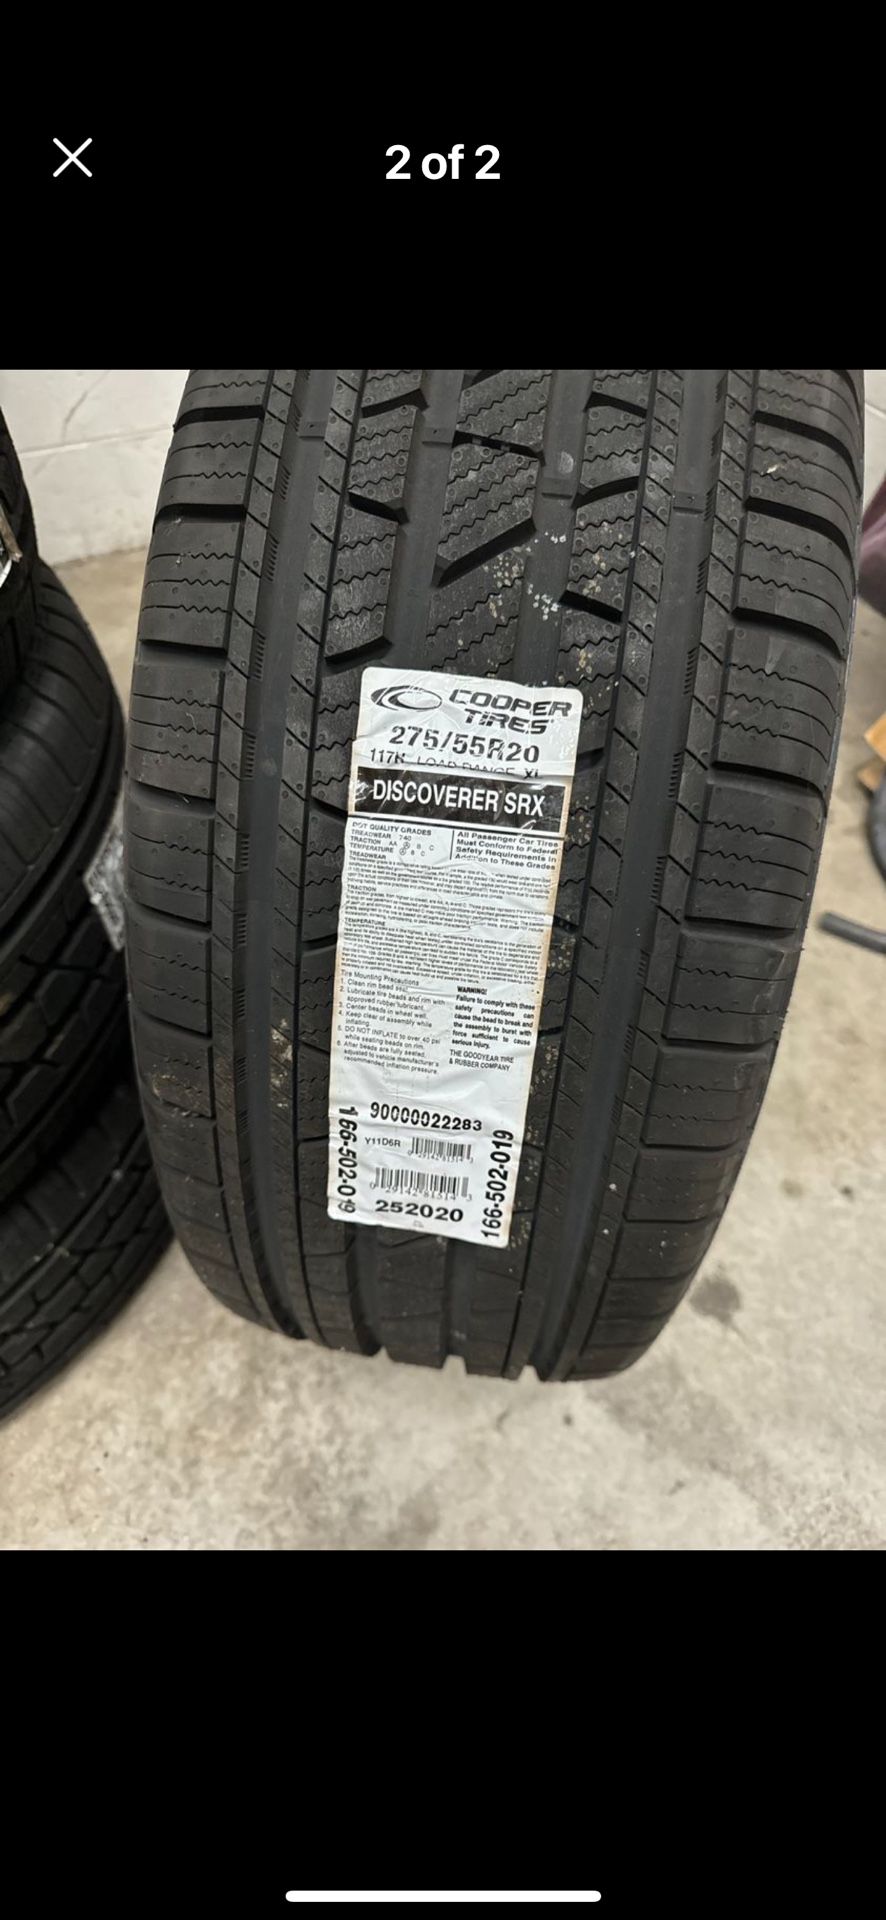 Brand New 275/55/20 Cooper Discover Srx Tires $400 Off